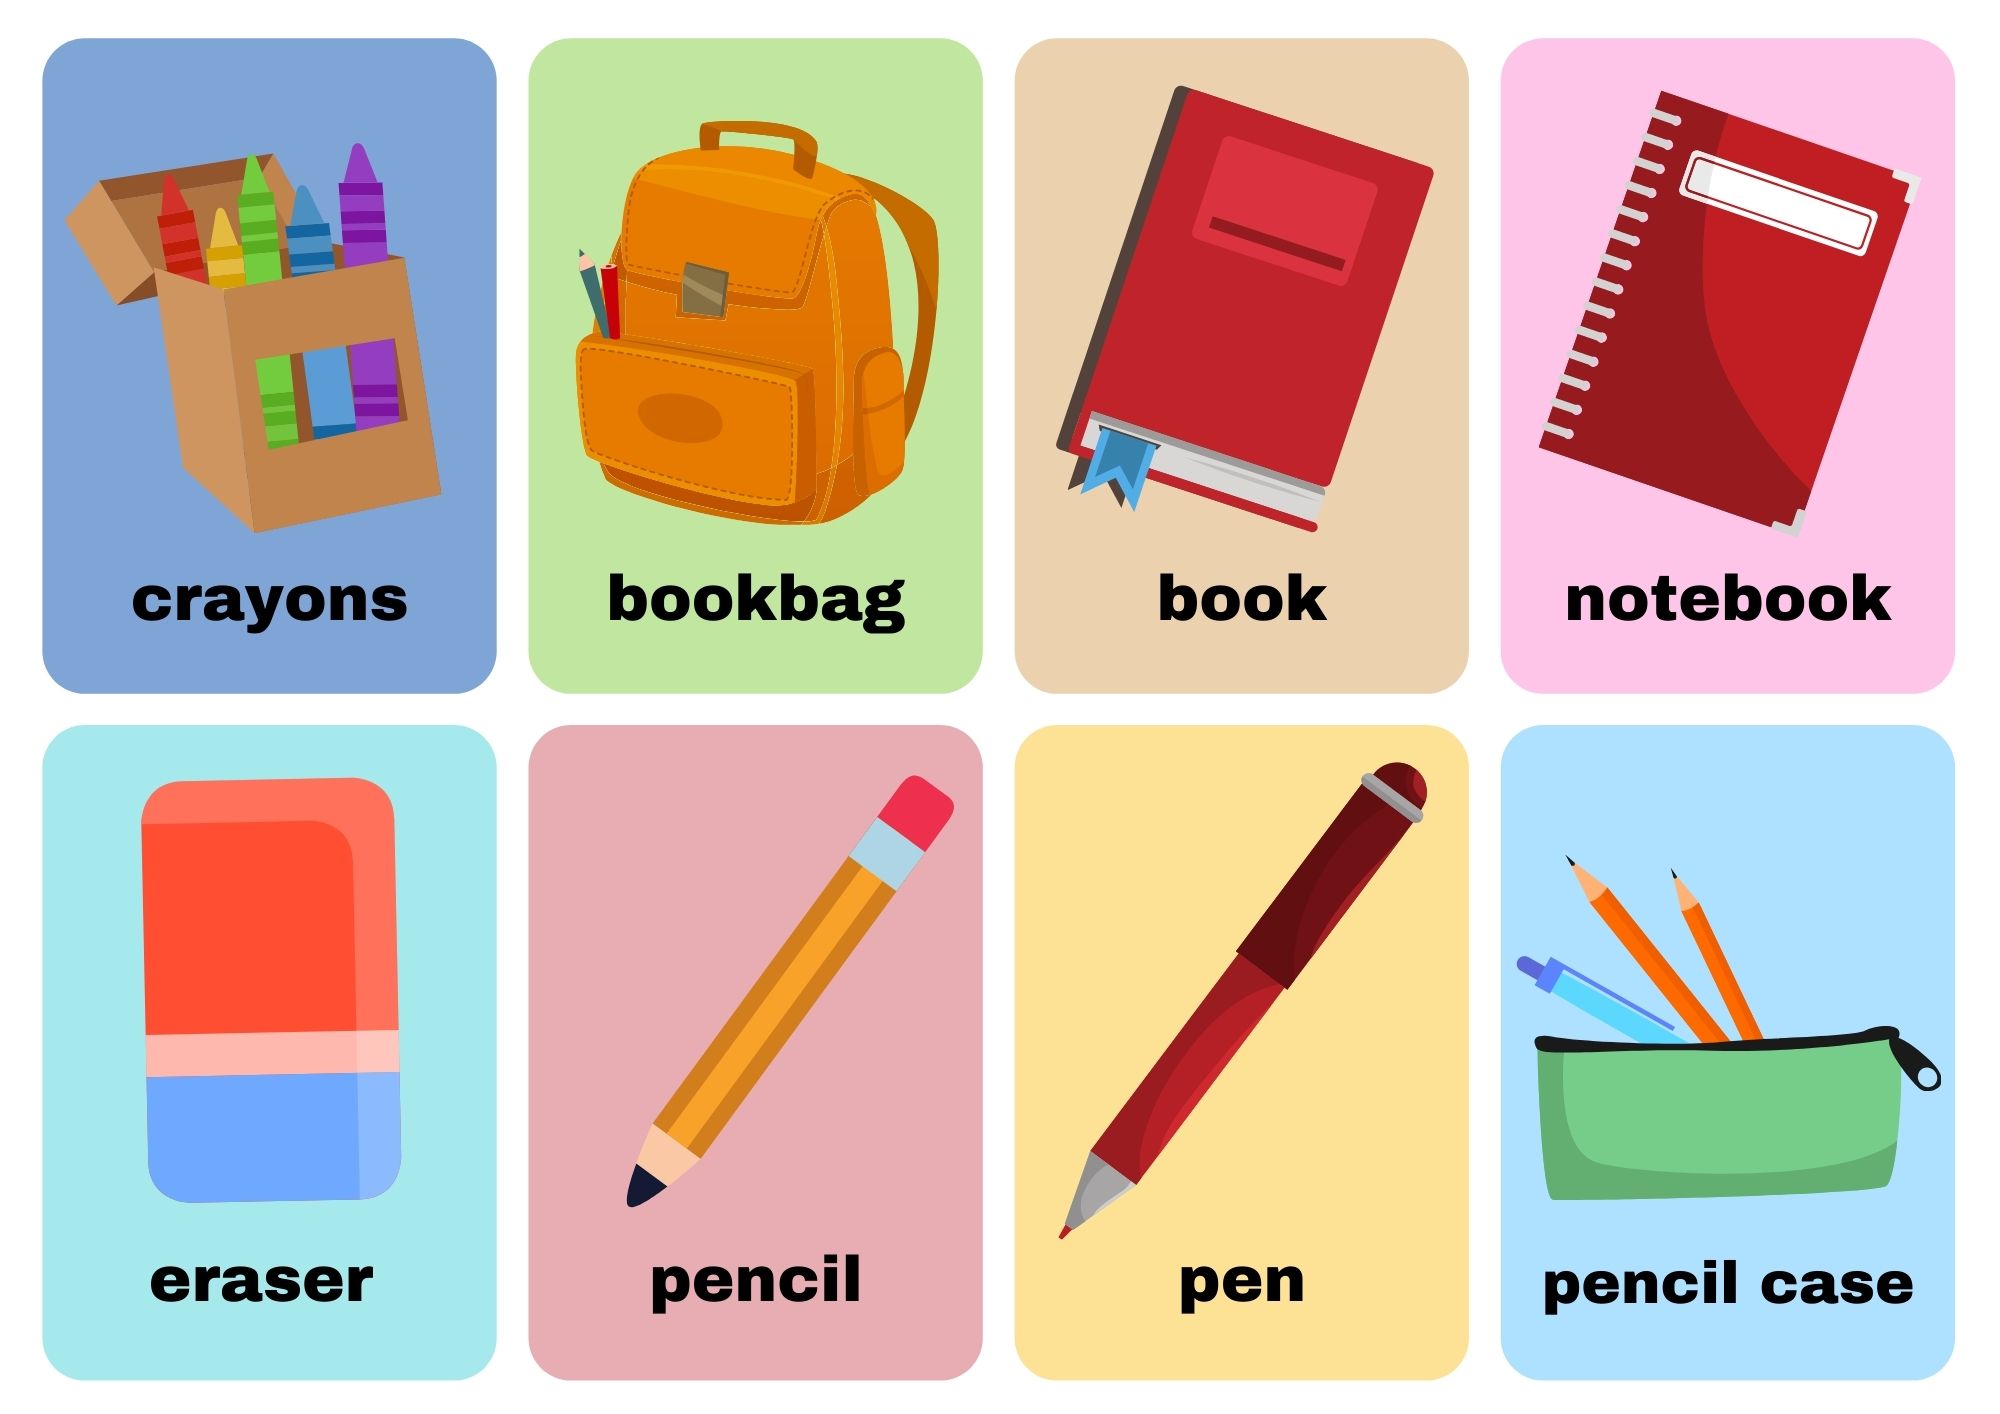 Classroom Objects Flashcards Free Printable Image And Word Cards | My ...